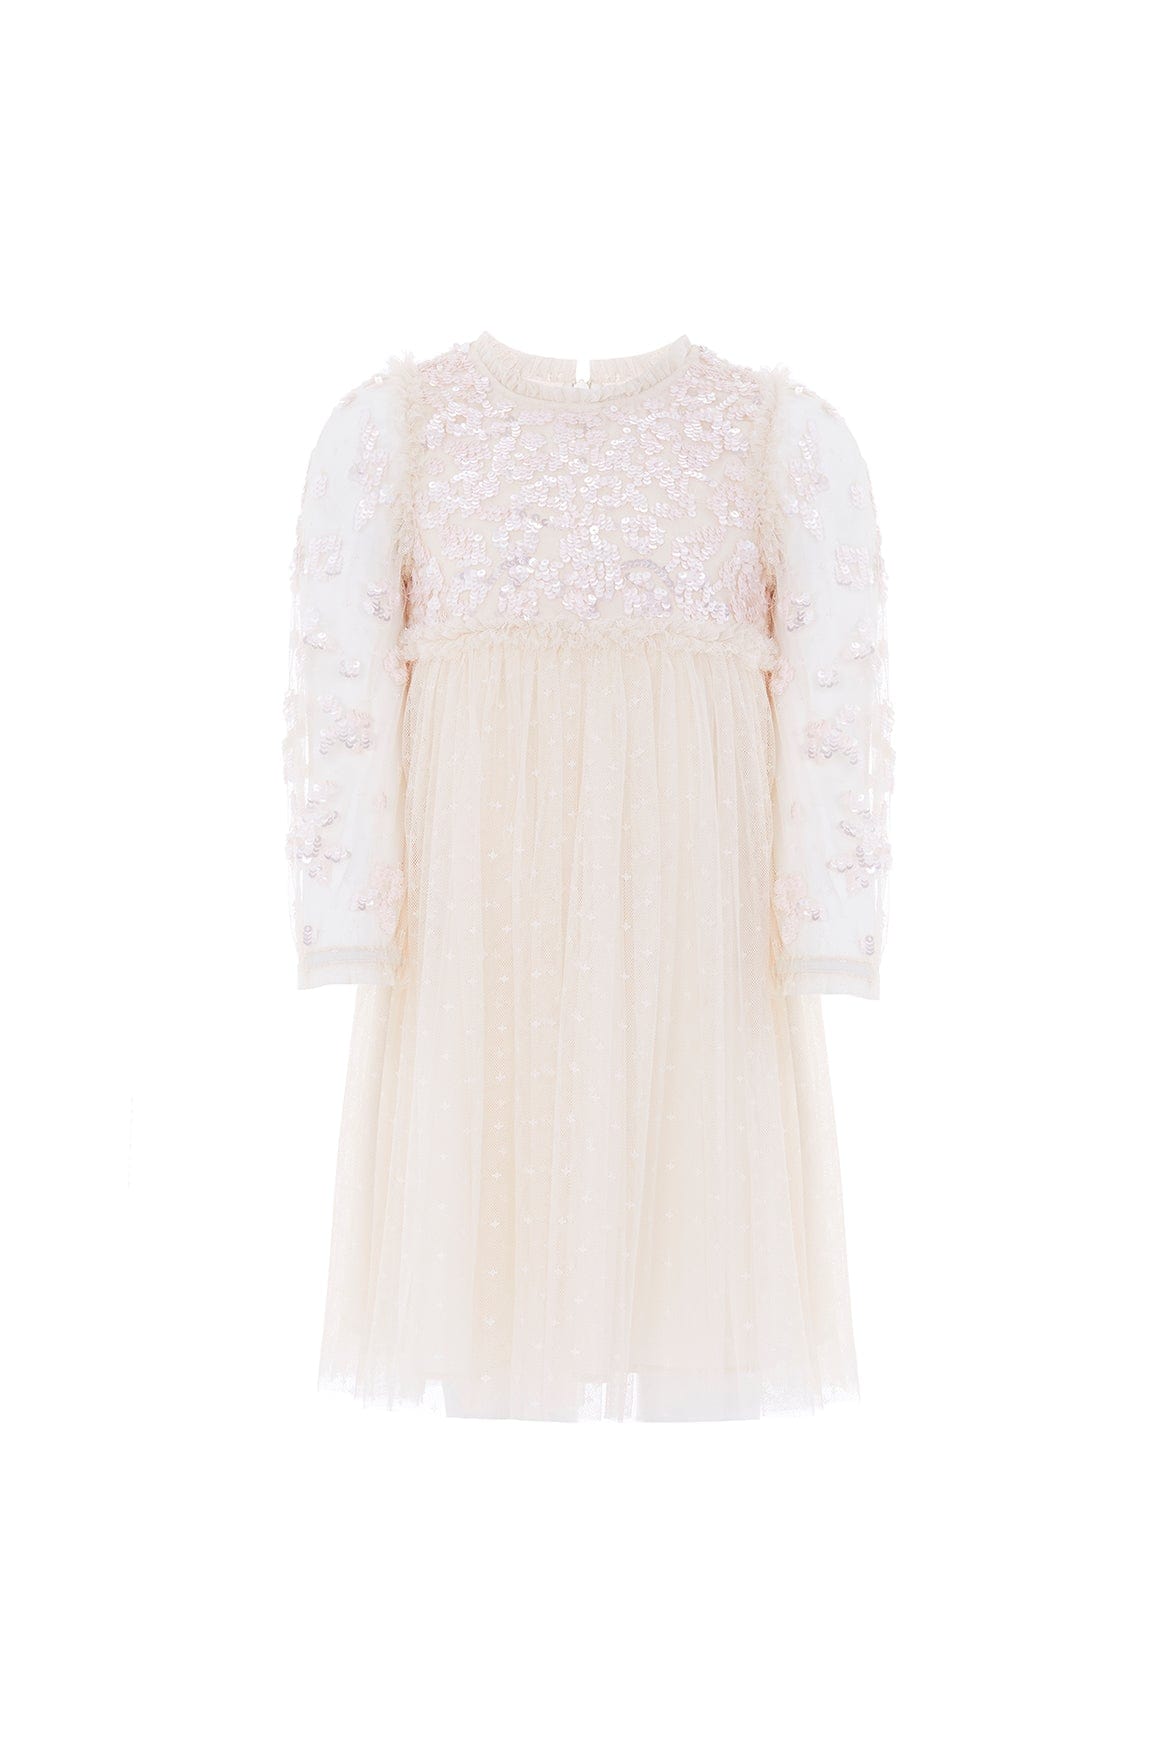 Lilybelle Long Sleeve Kids Dress – Champagne | Needle & Thread